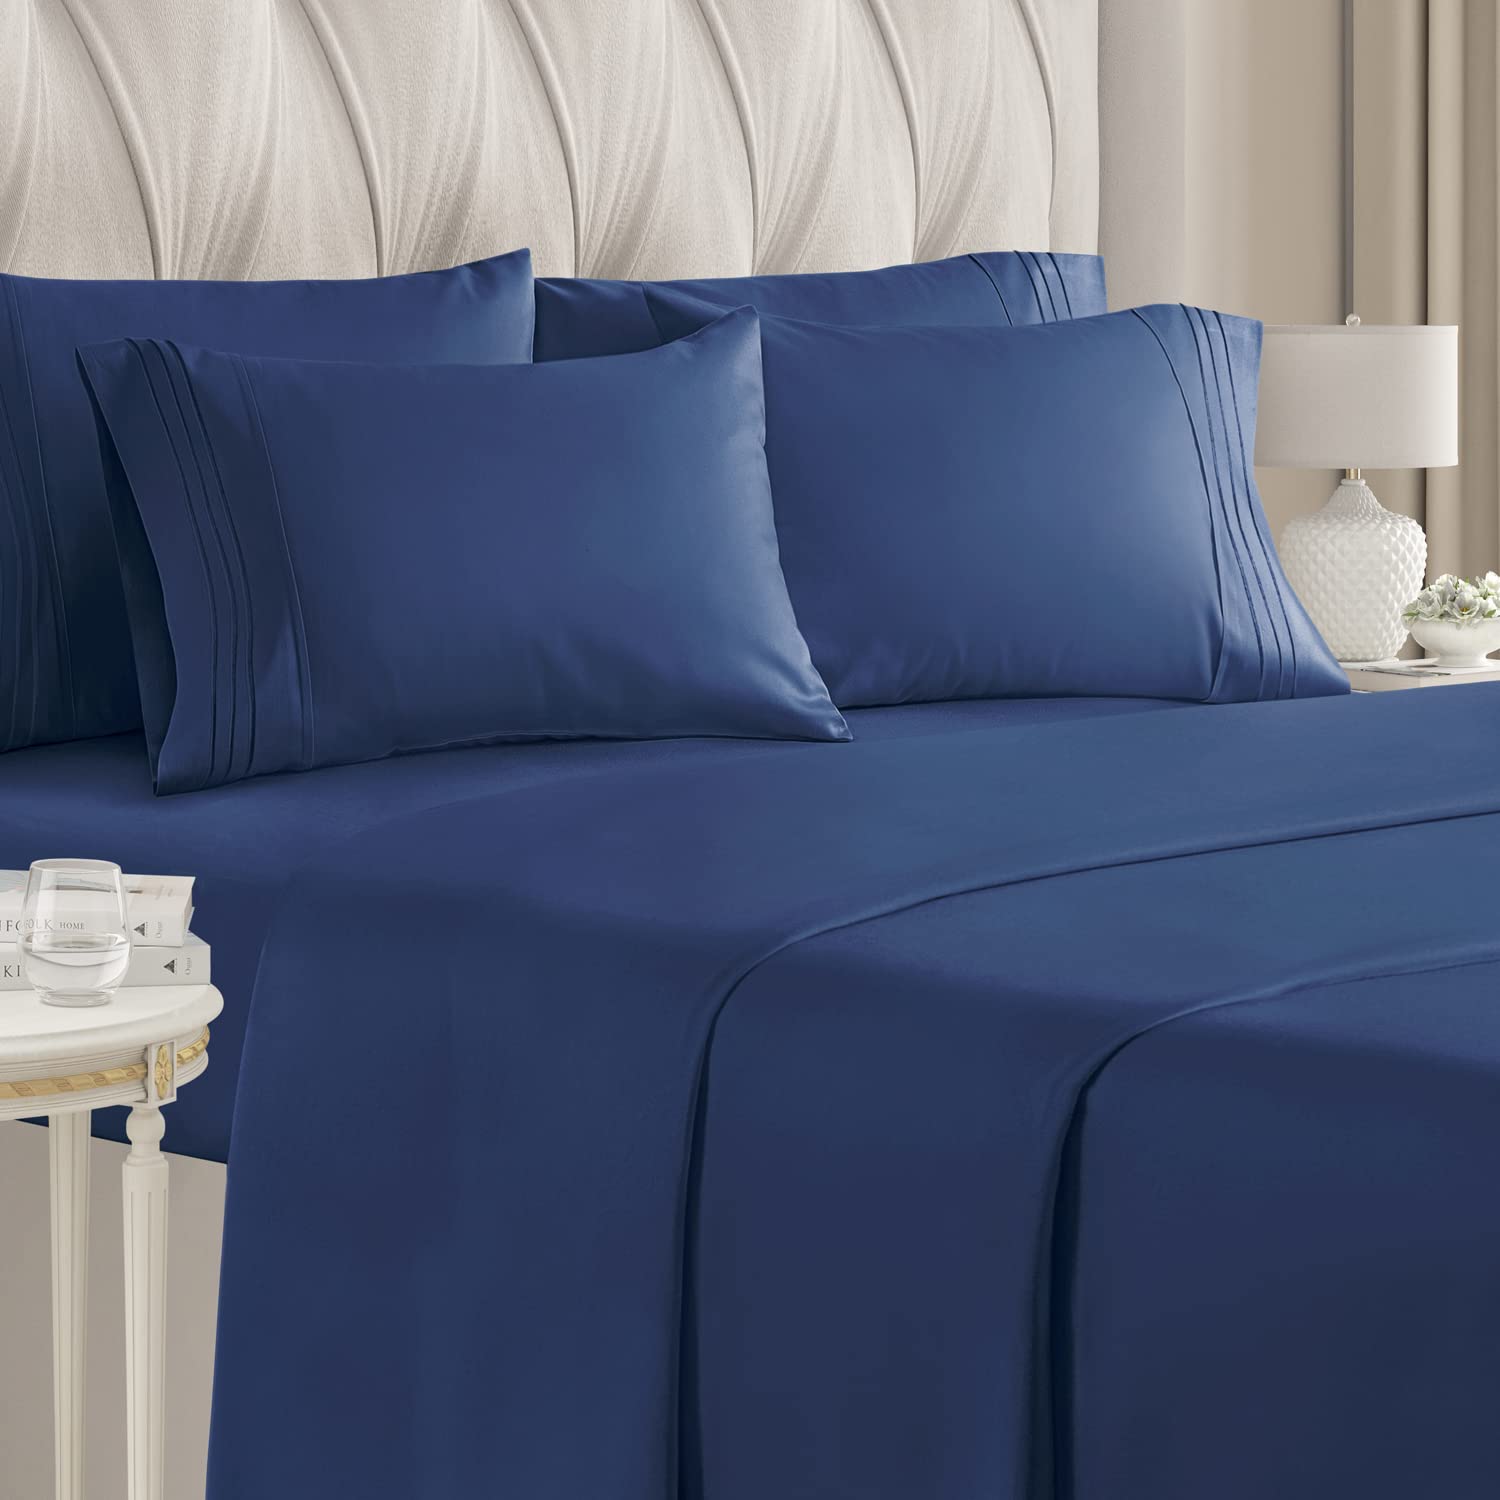 Book Cover Queen Size Sheet Set - 6 Piece Set - Hotel Luxury Bed Sheets - Extra Soft - Deep Pockets - Easy Fit - Breathable & Cooling Sheets - Wrinkle Free -Comfy - Navy Blue Bed Sheets - 6 Pc Queen, Royal Blue 11 - Navy Blue Queen